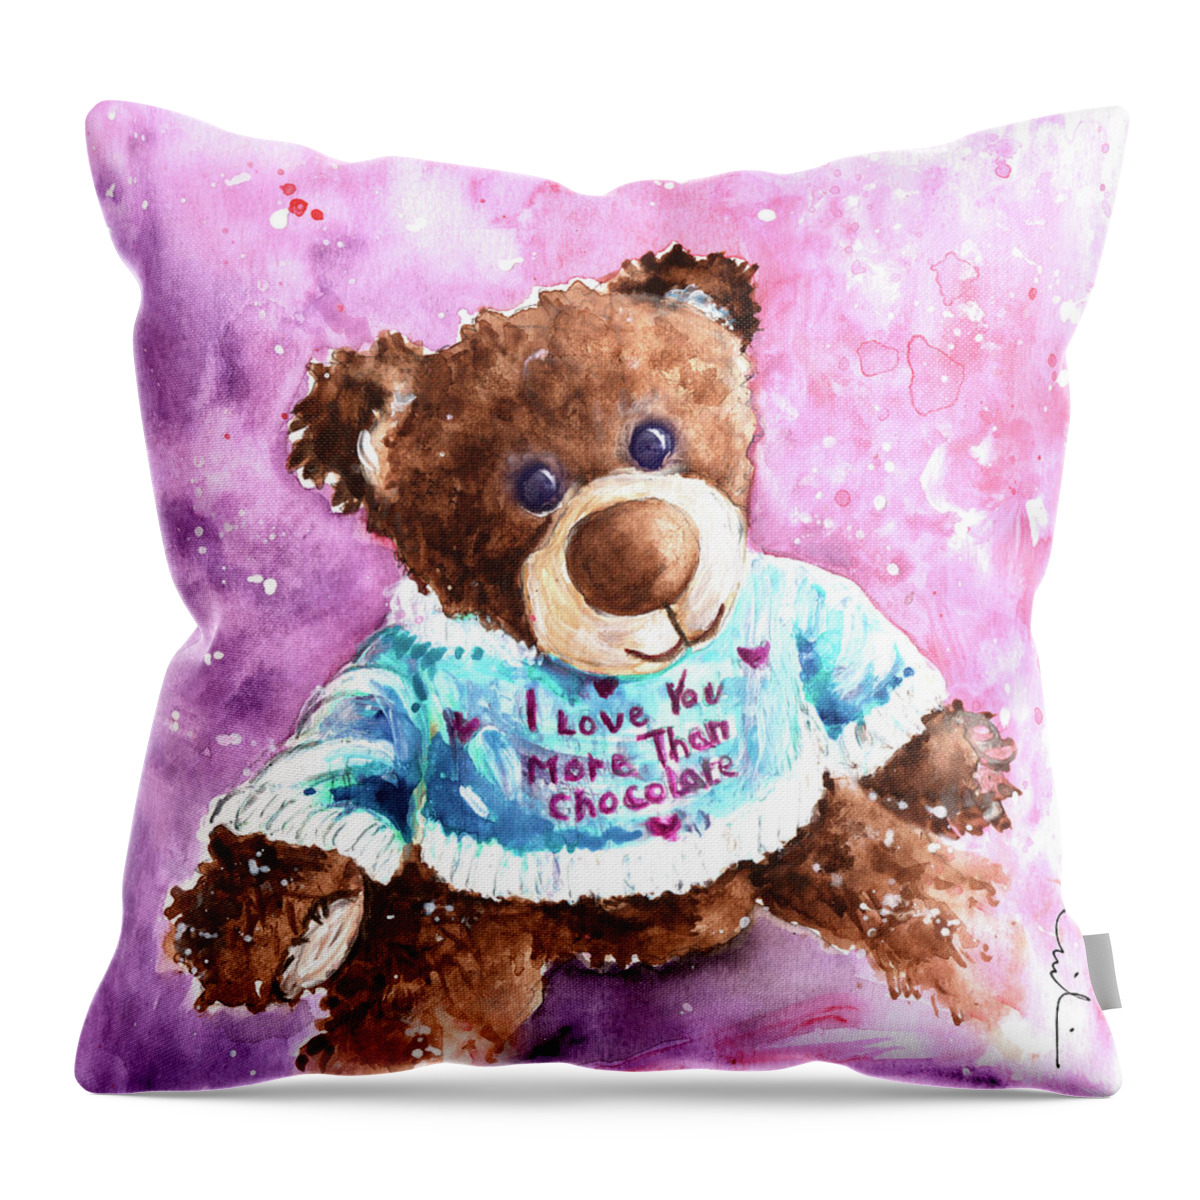 Truffle Mcfurry Throw Pillow featuring the painting I Love You More Than Chocolate by Miki De Goodaboom